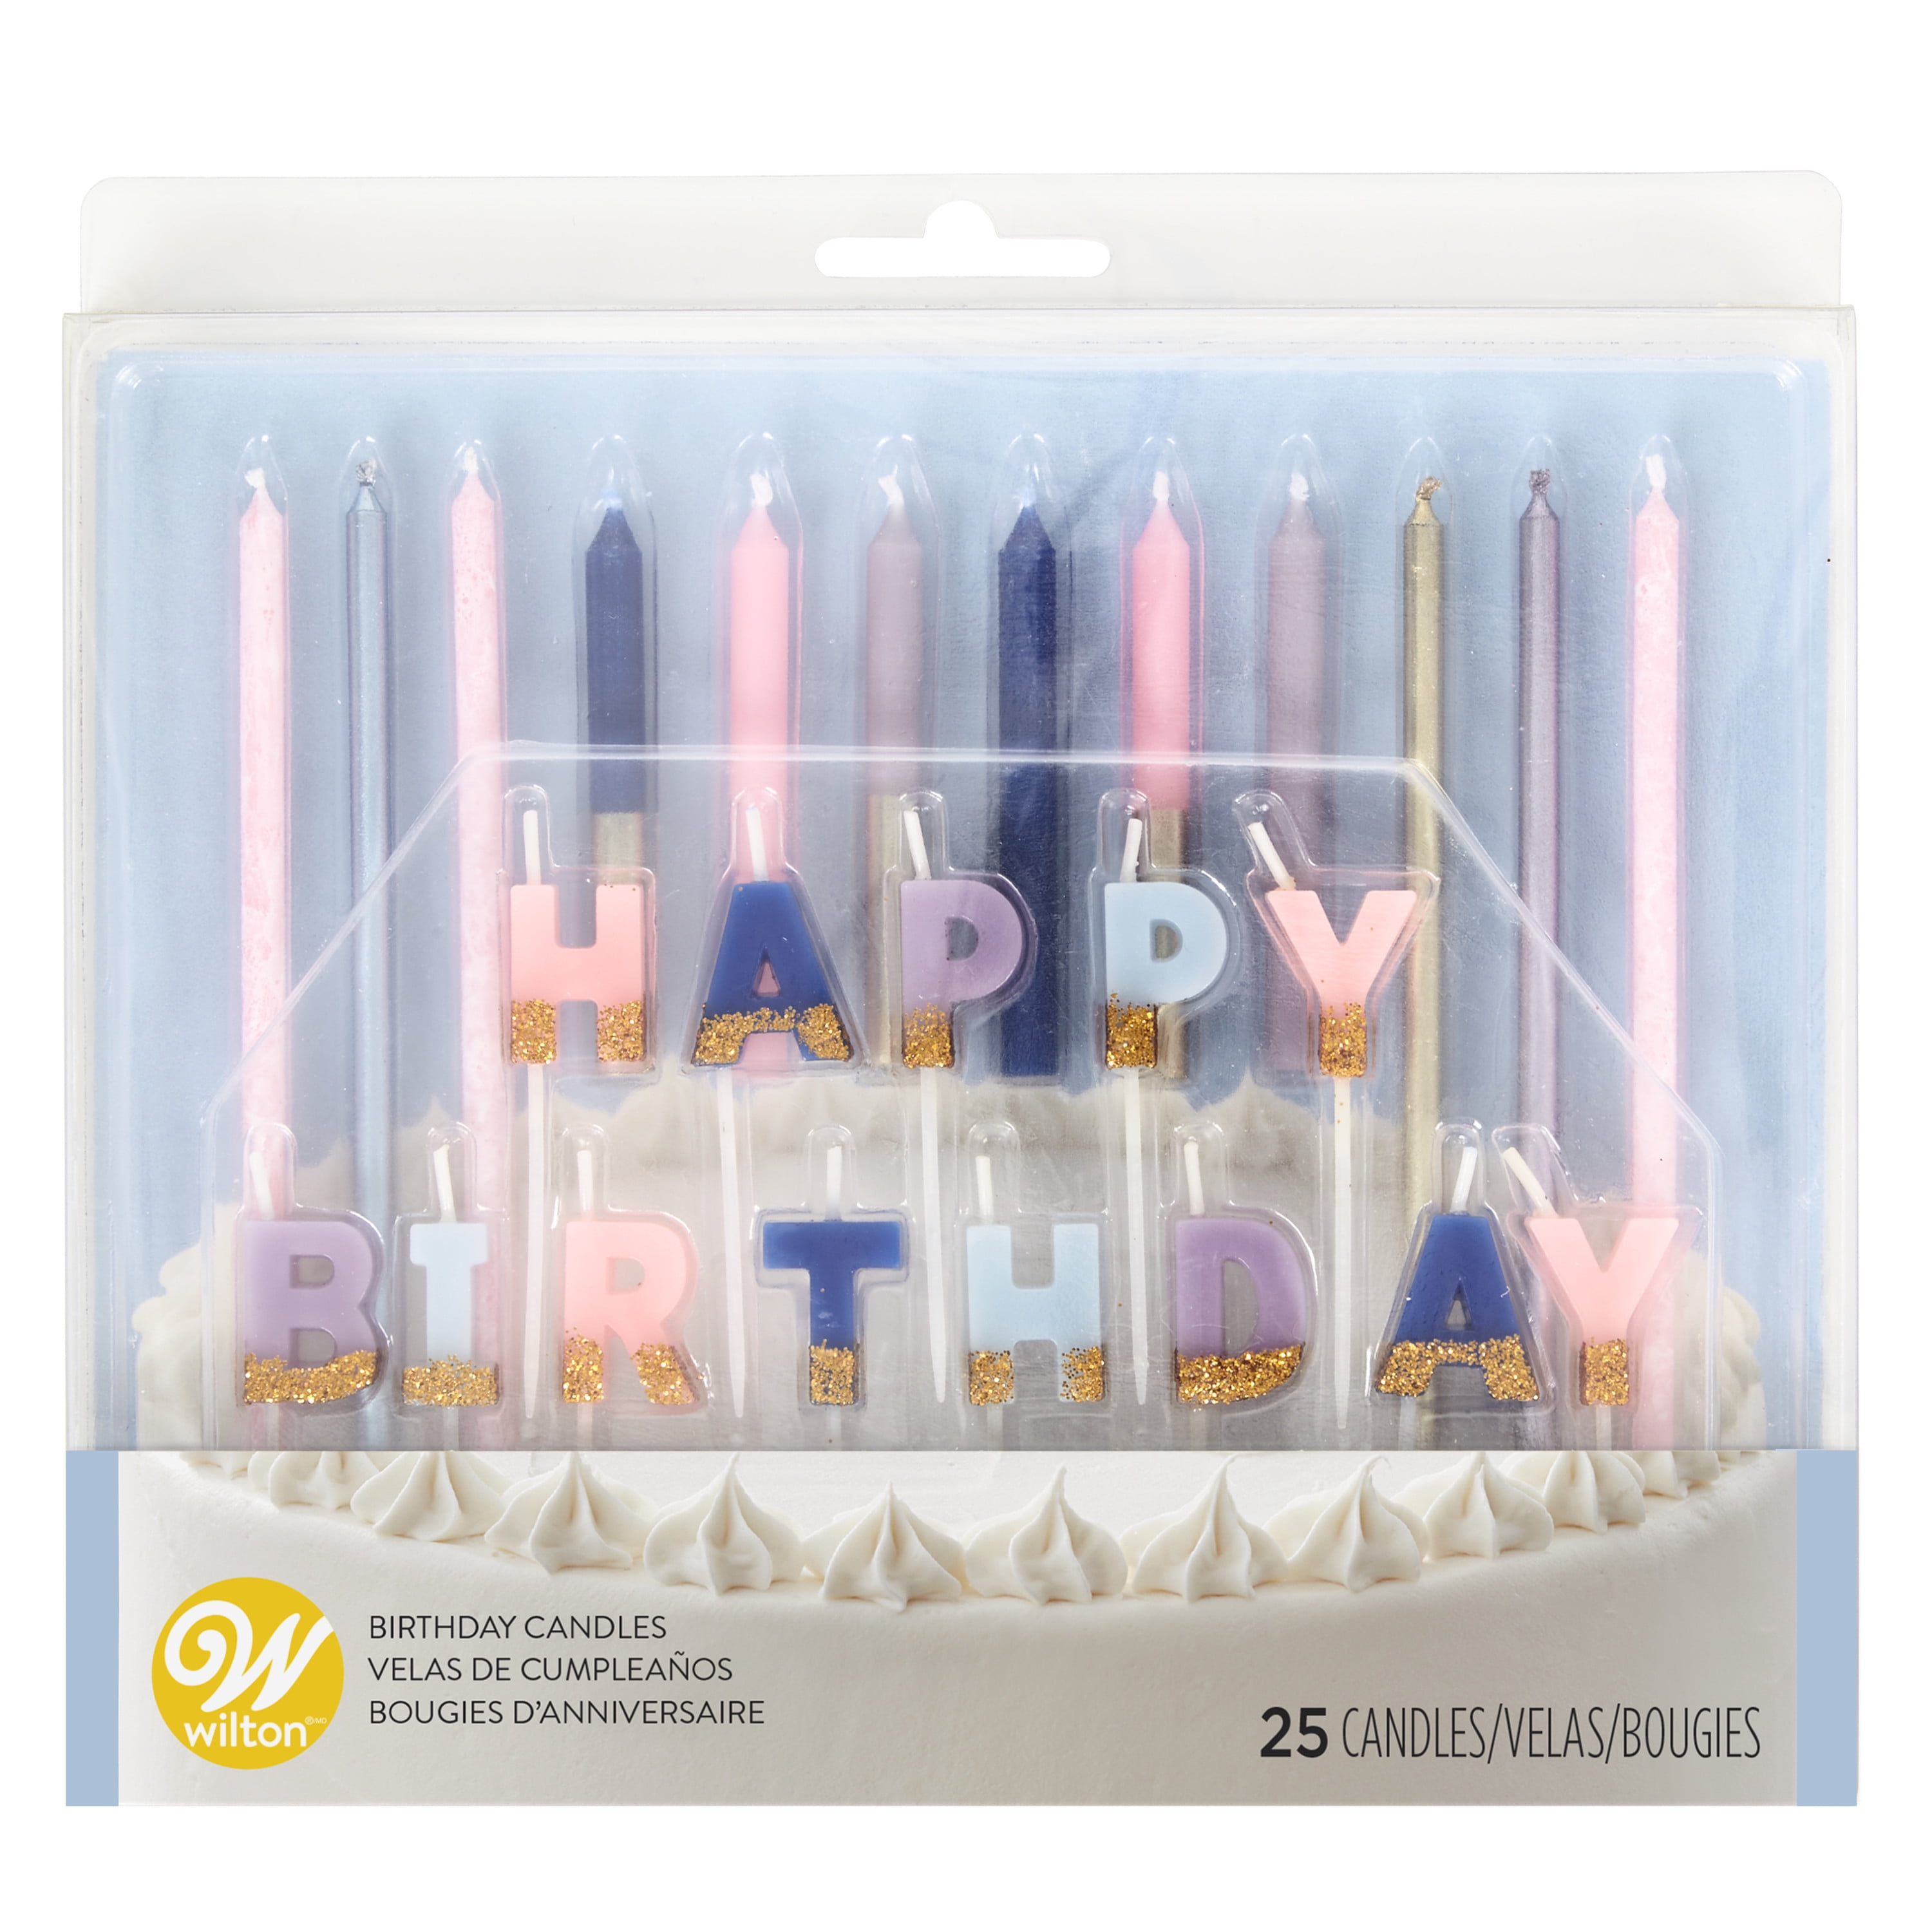 THE PIONEER WOMAN BIRTHDAY CANDLE ASSORTMENT NEW FLORAL PICK CANDLES